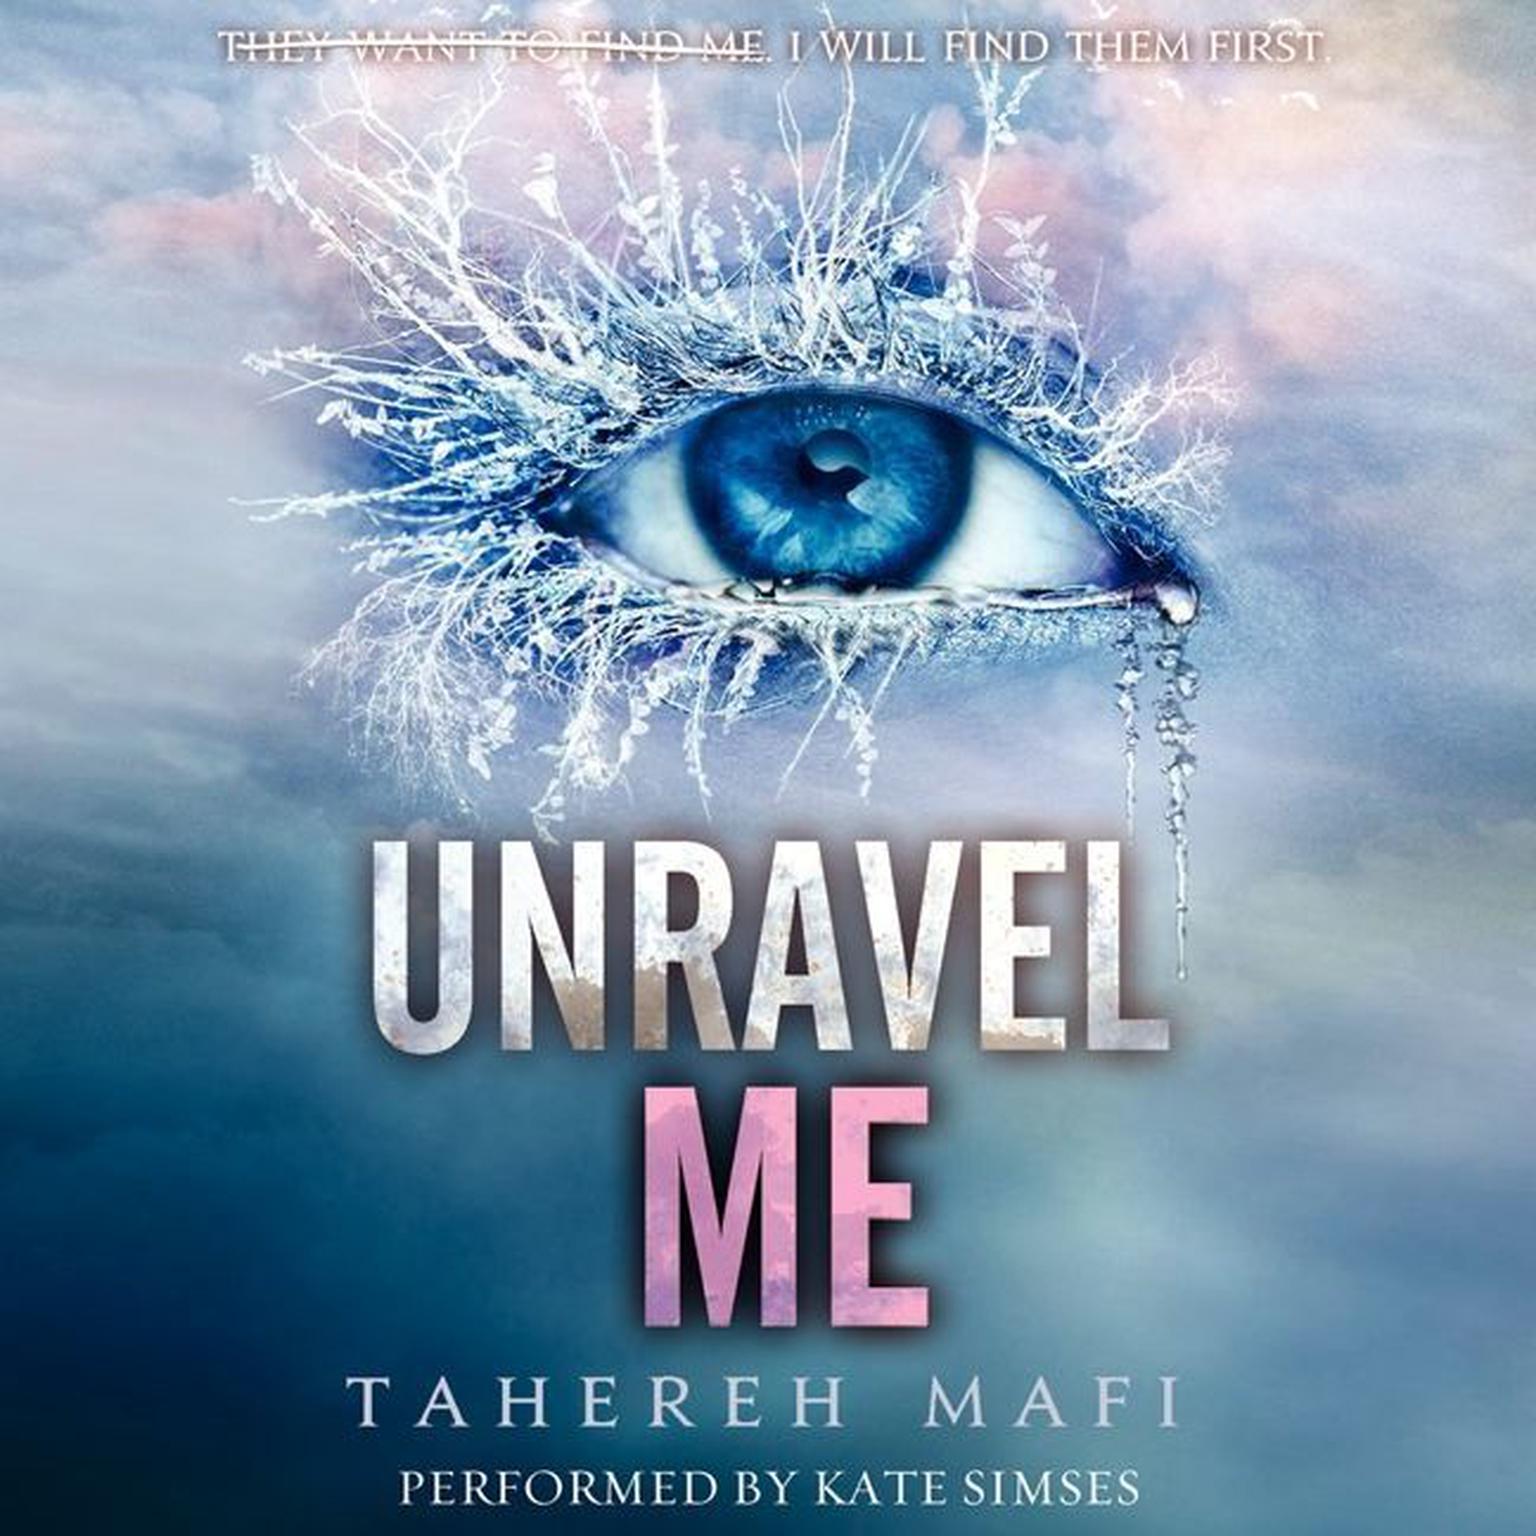 Unravel Me Audiobook, by Tahereh Mafi